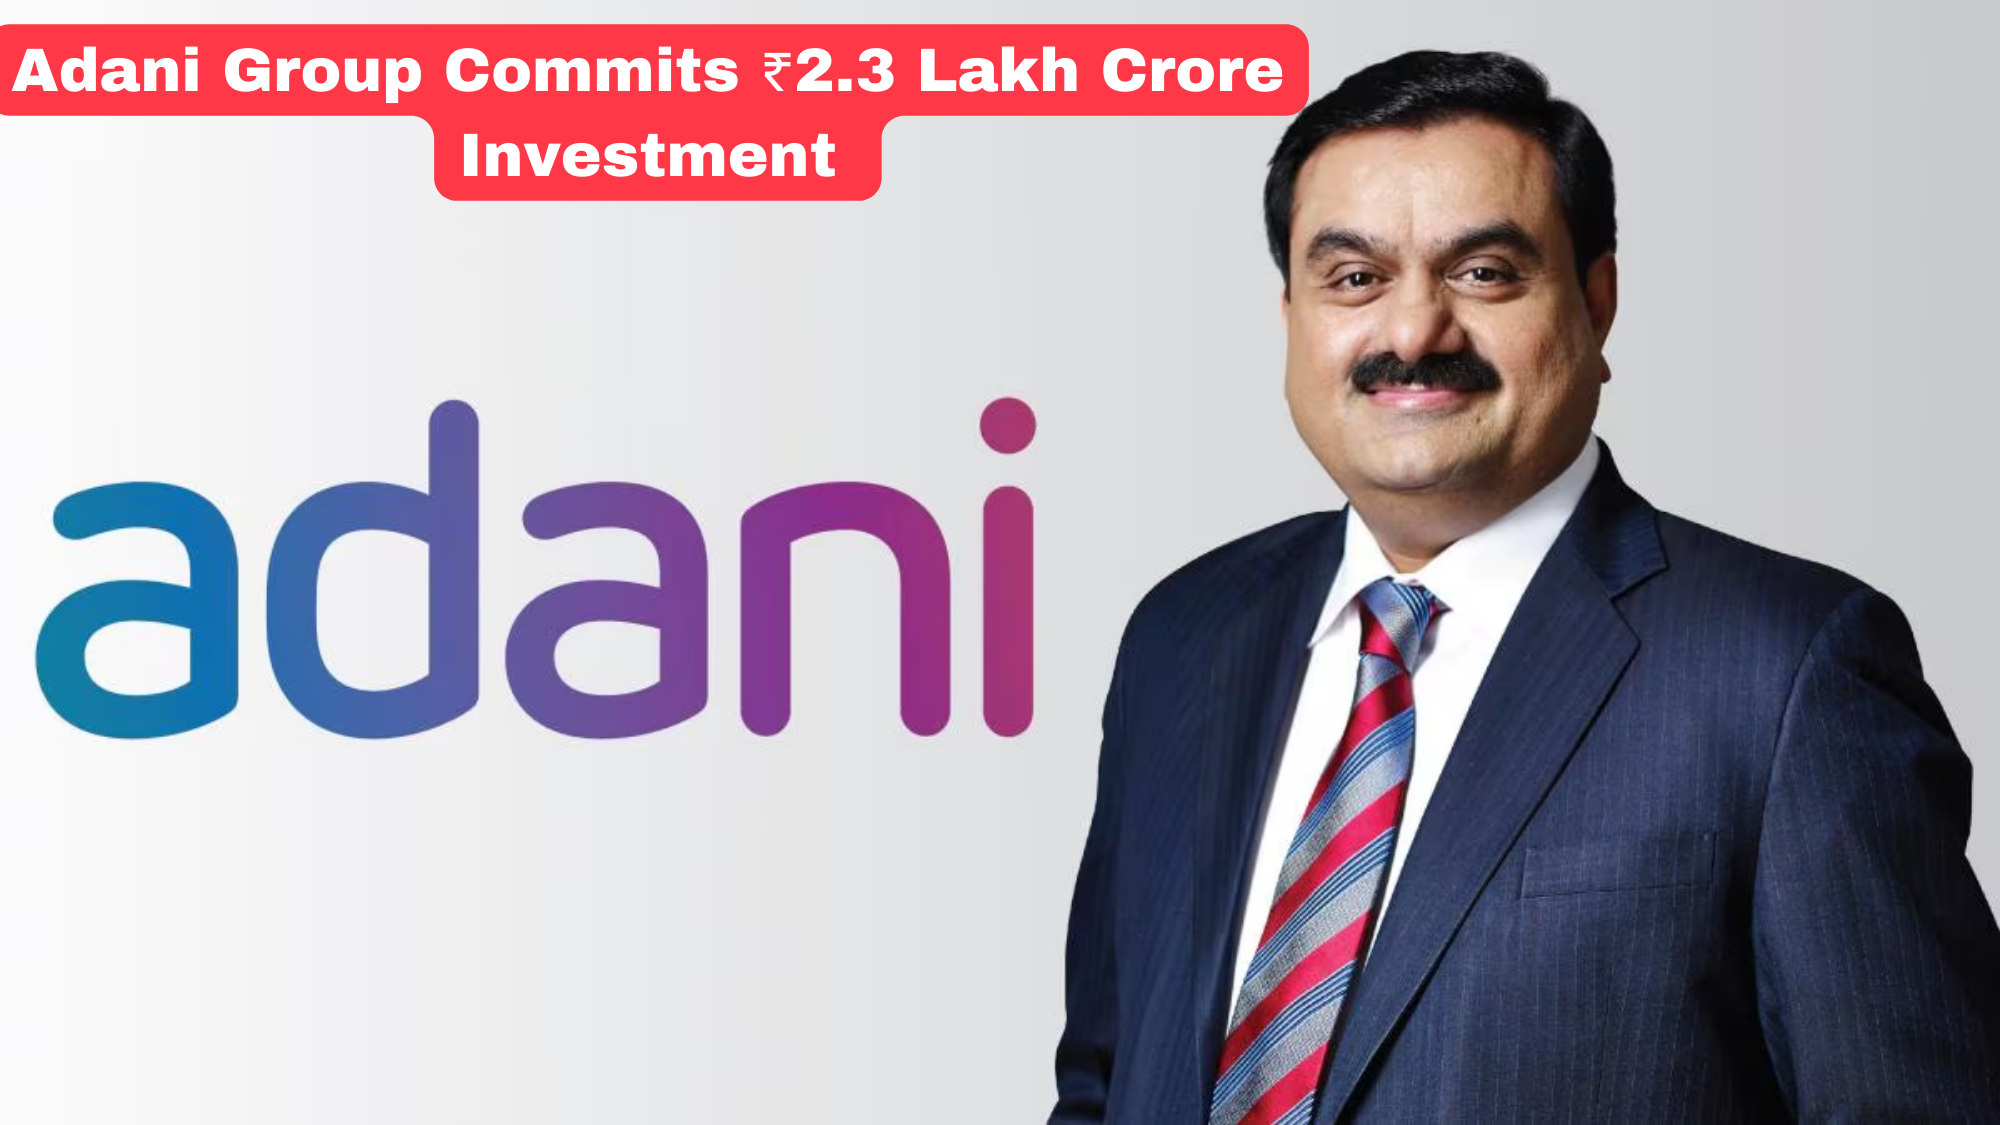 Adani Group Massive Investment in Renewable Energy and Manufacturing. ₹2.3 Lakh Crore Investment